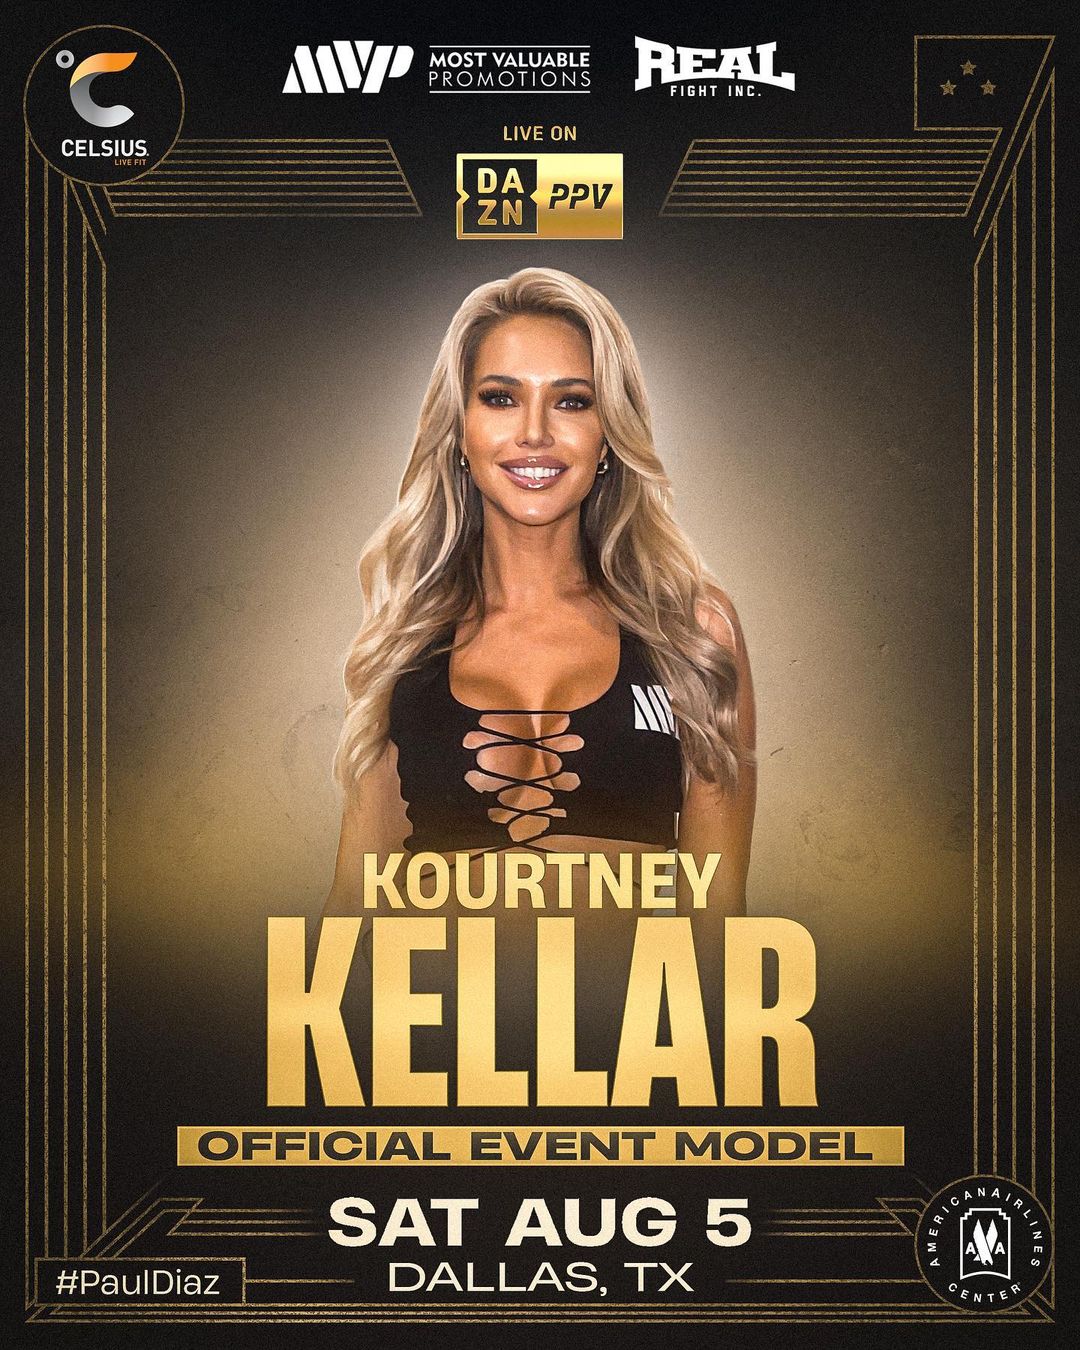 Kourtney Kellar will be one of four ring girls at the event